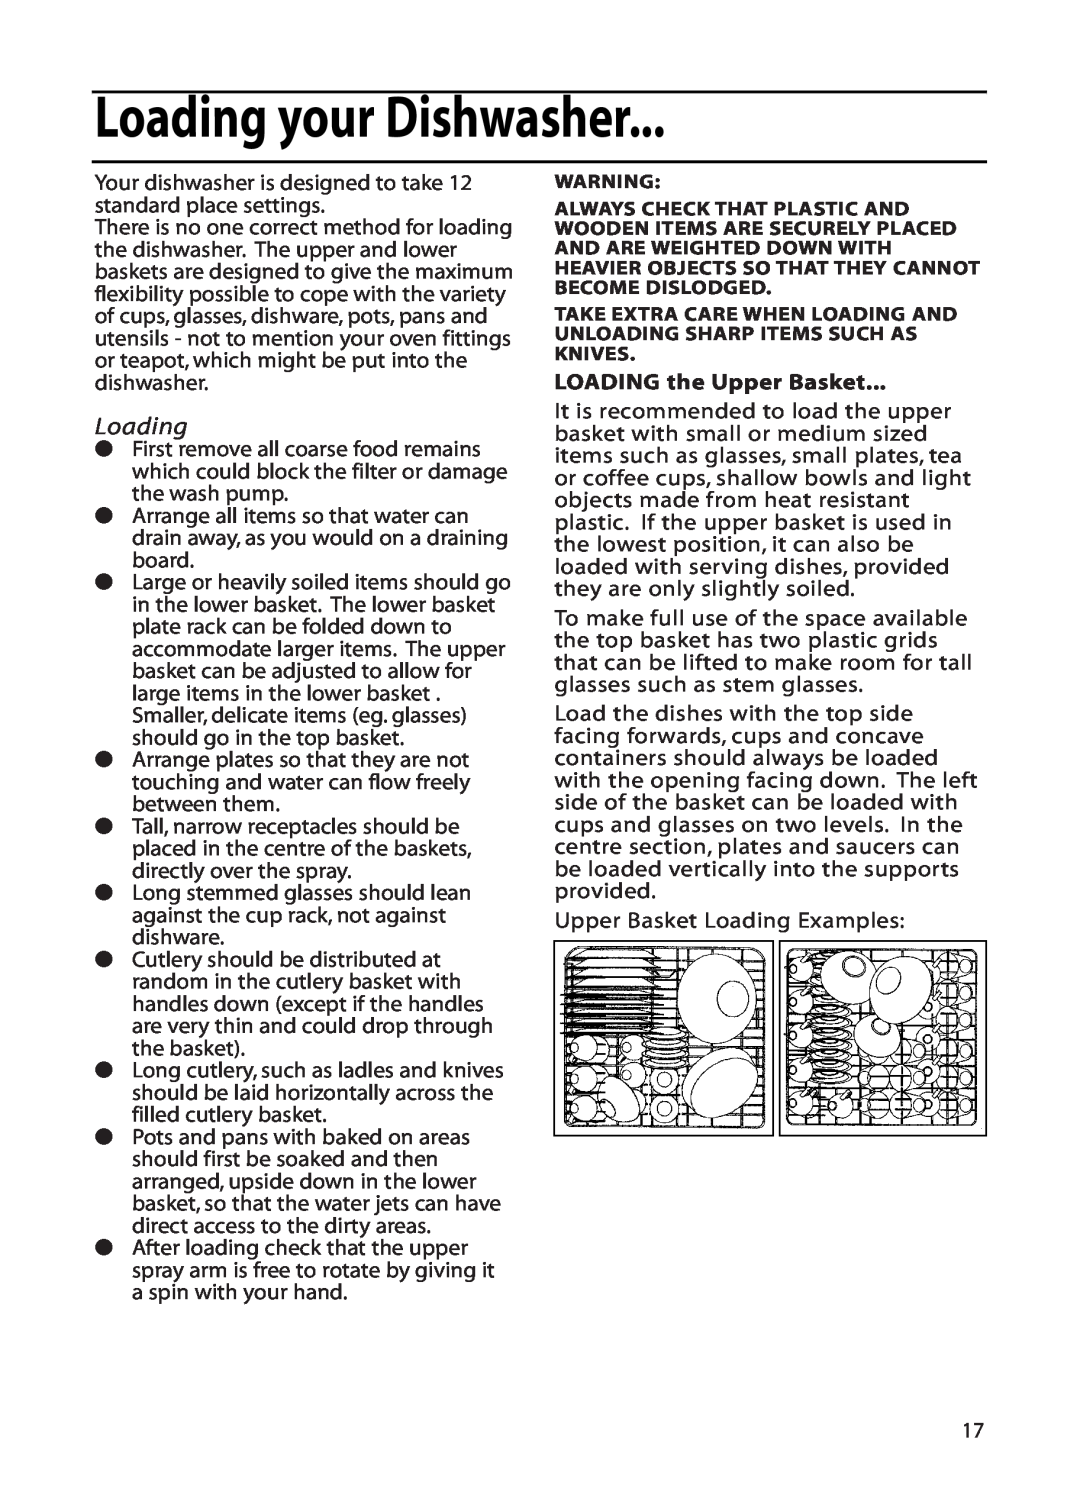 Hotpoint DF55, DF56 installation instructions Loading your Dishwasher, LOADING the Upper Basket 